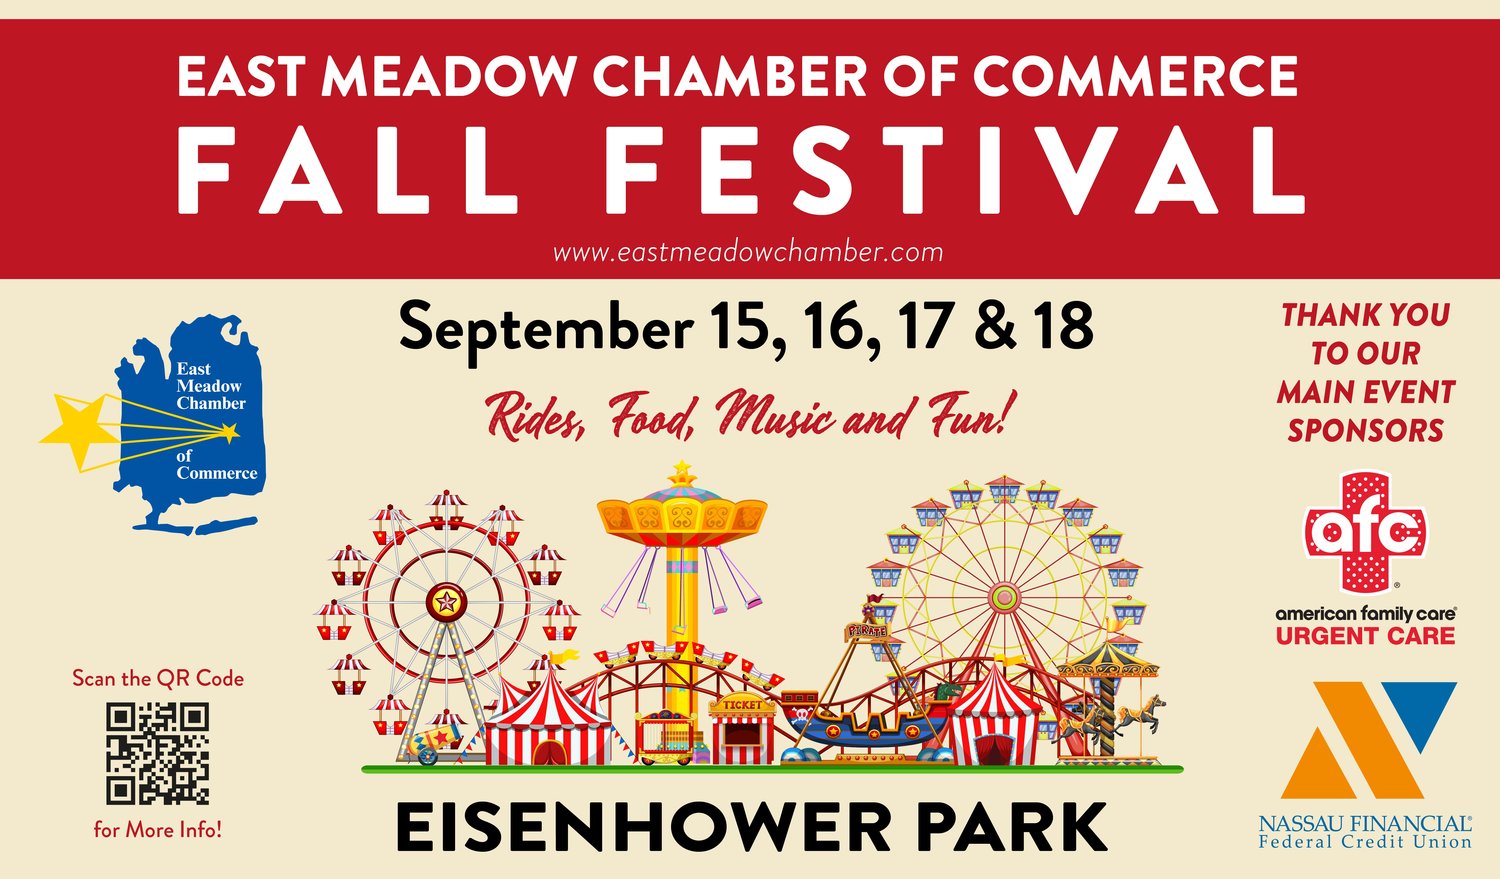 The East Meadow Chamber of Commerce is getting ready to hold its first fall festival for residents in Eisenhower Park, Sept. 15 to 18. There will be rides, food, crafts, entertainment, and more.